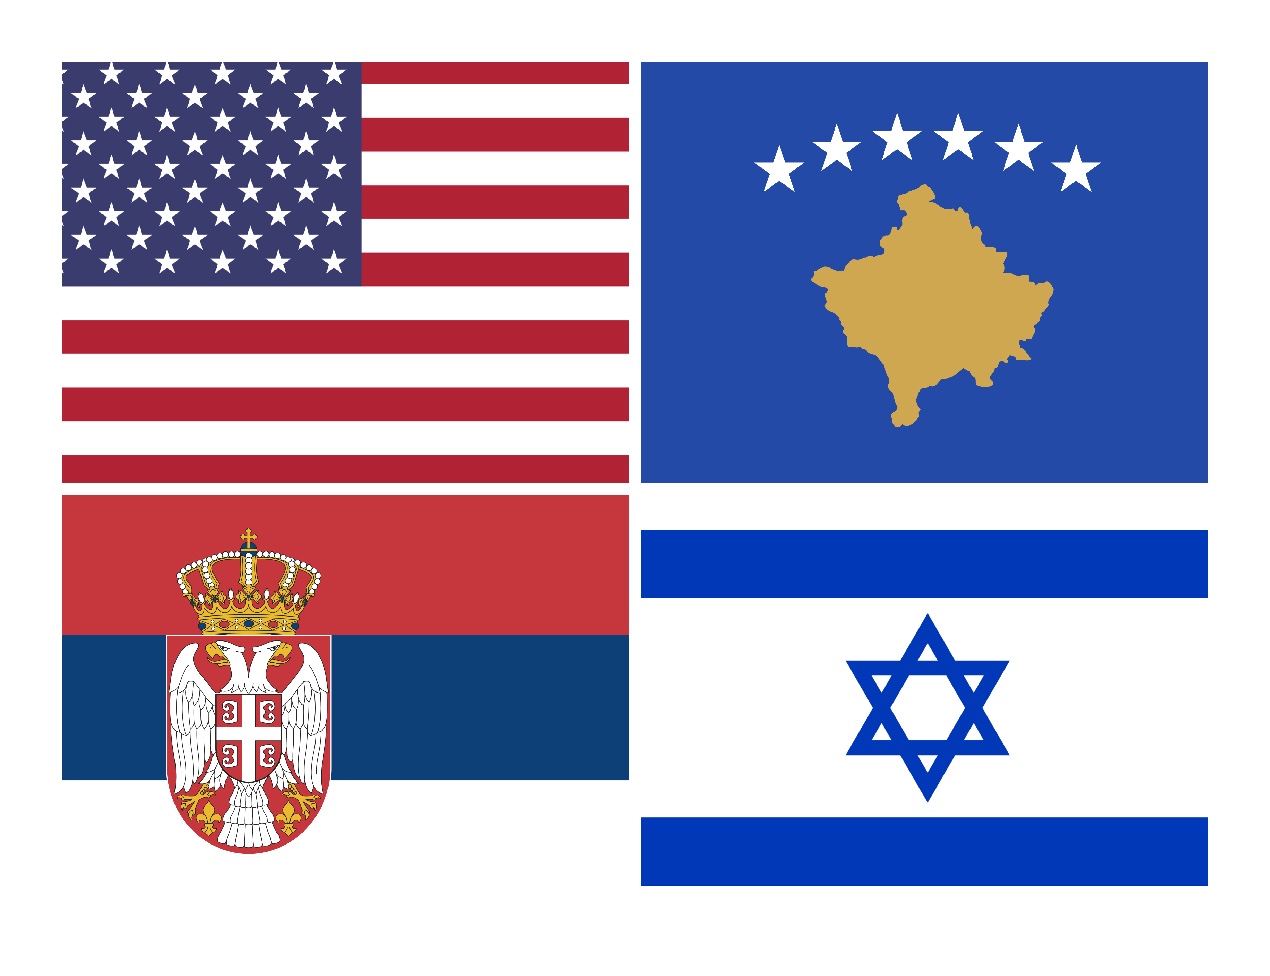 Serbia to move its embassy to Jerusalem and Kosovo to recognise Israel |  Jewish News